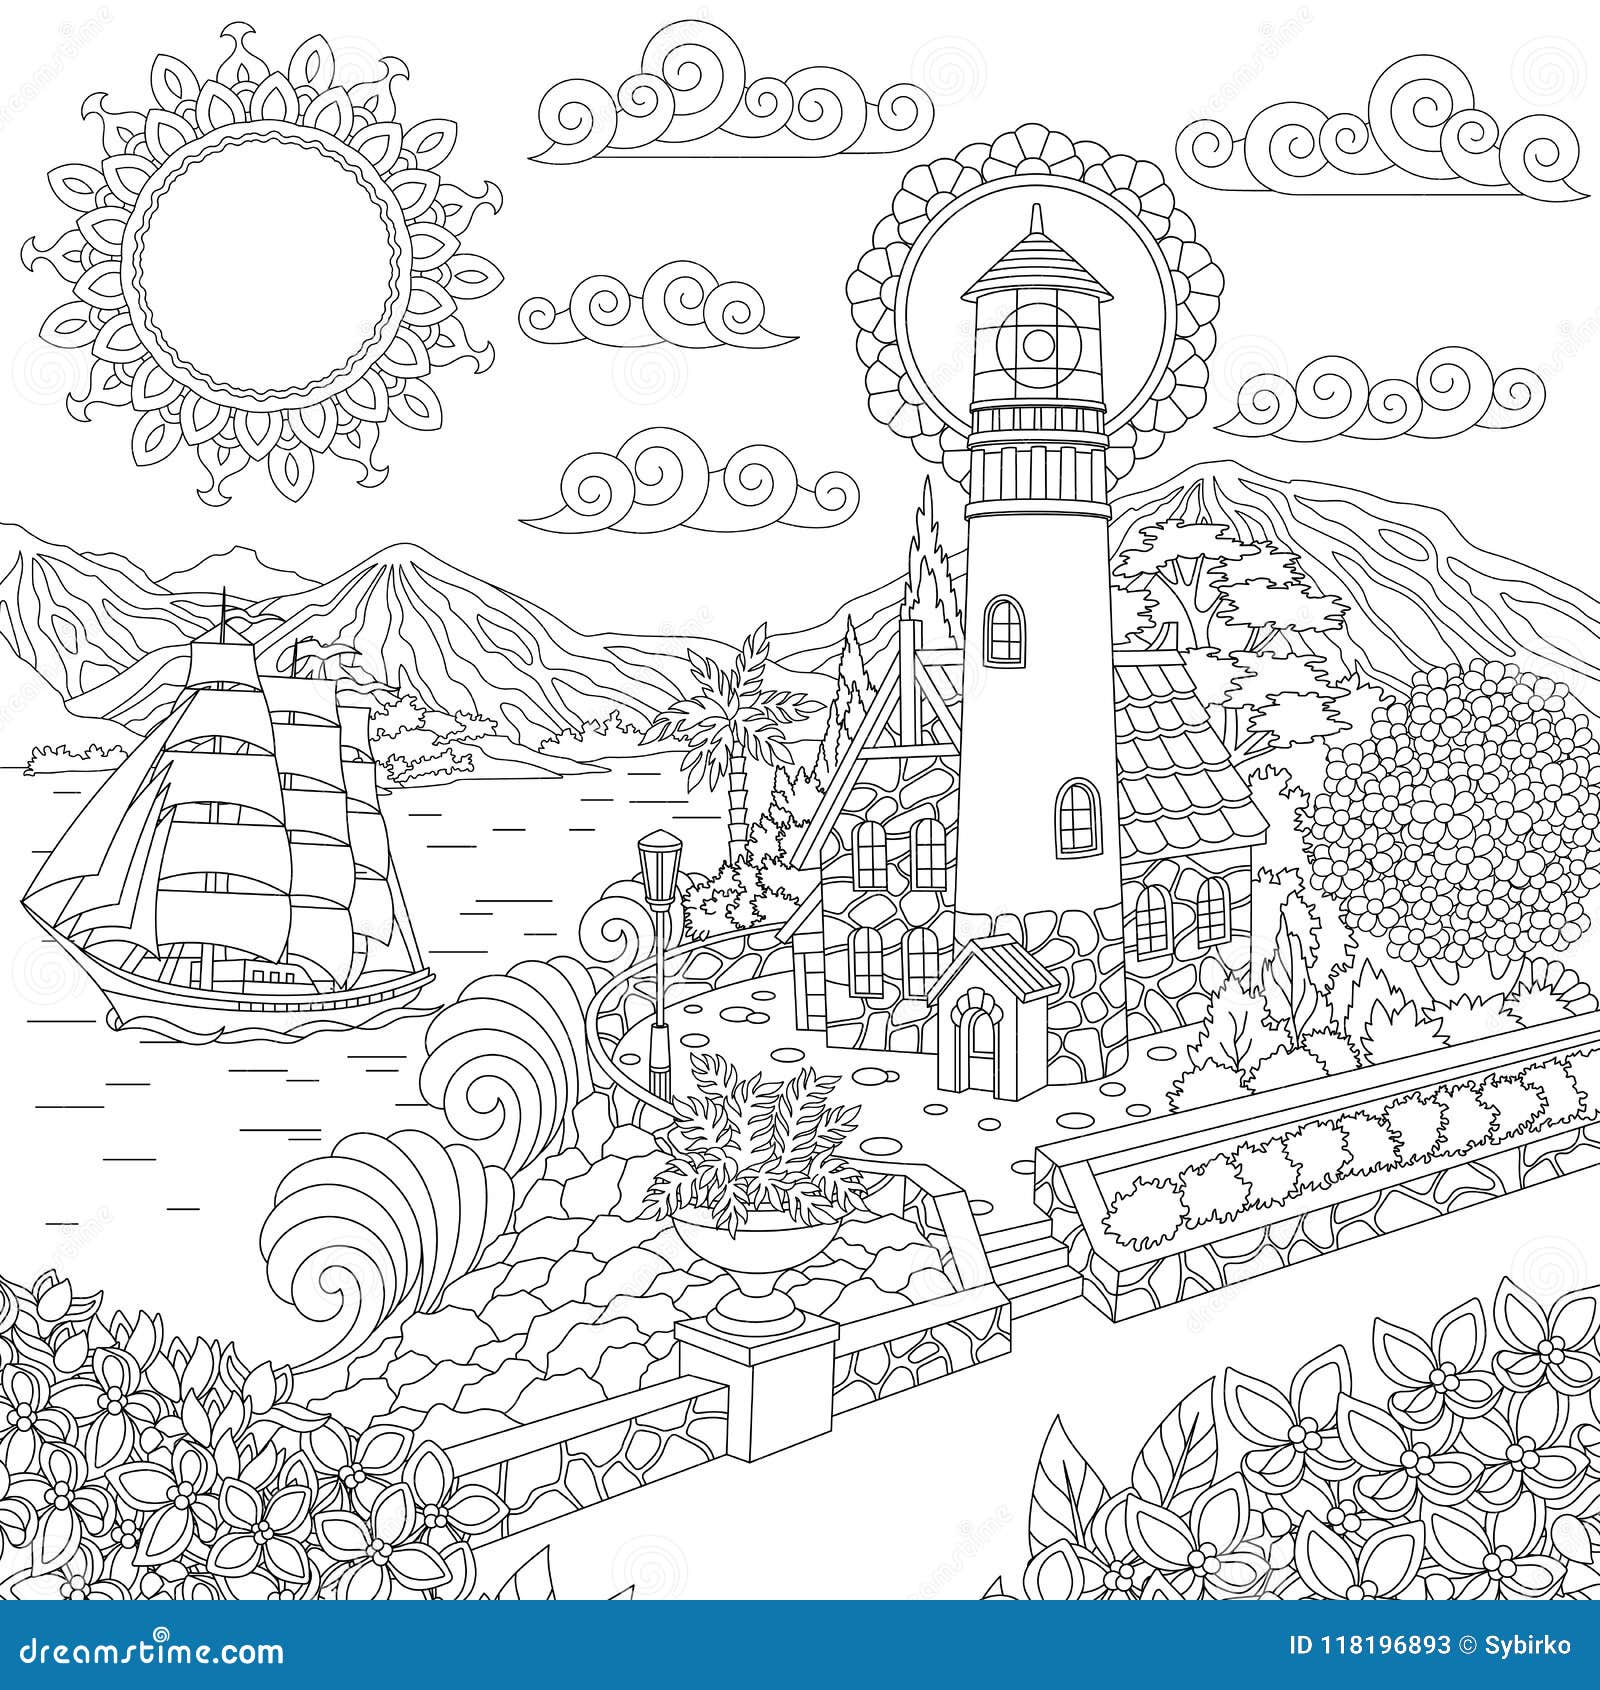 What to bring on vacation: travel light with your Zentangle supplies. -  ArtsAmuse